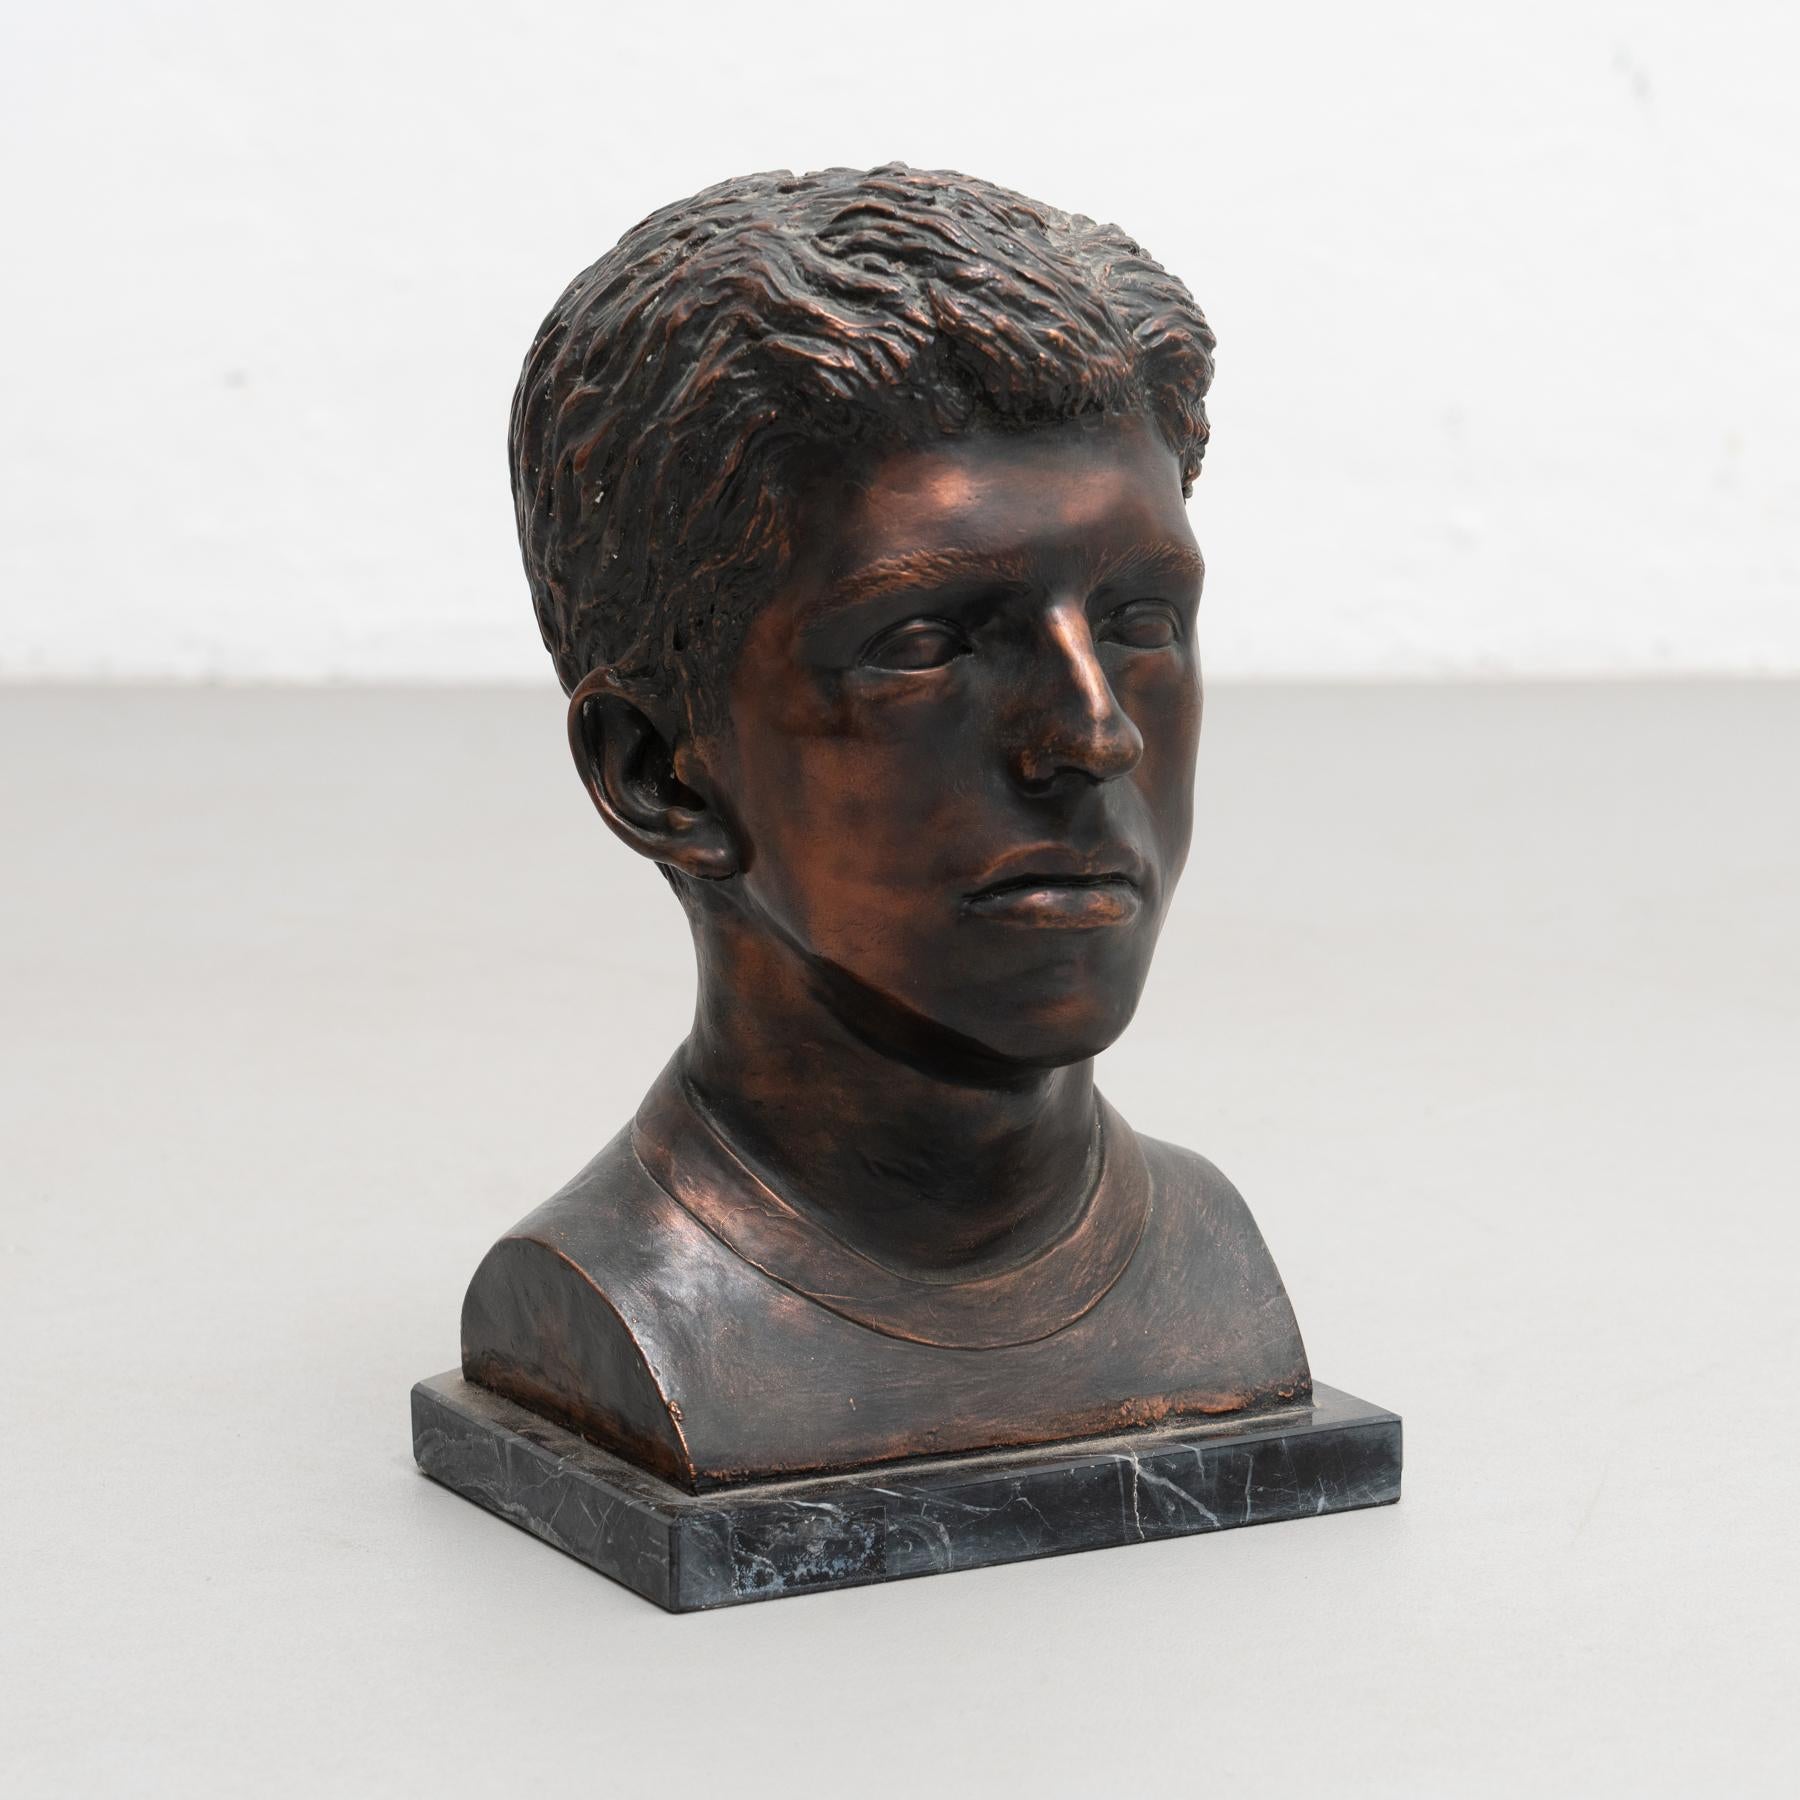 Mid-20th century plater bust sculpture of a man on a marble base.

Made in Spain, circa 1960.

In original condition, with minor wear consistent with age and use, preserving a beautiful patina.

Materials:
plaster
marble.